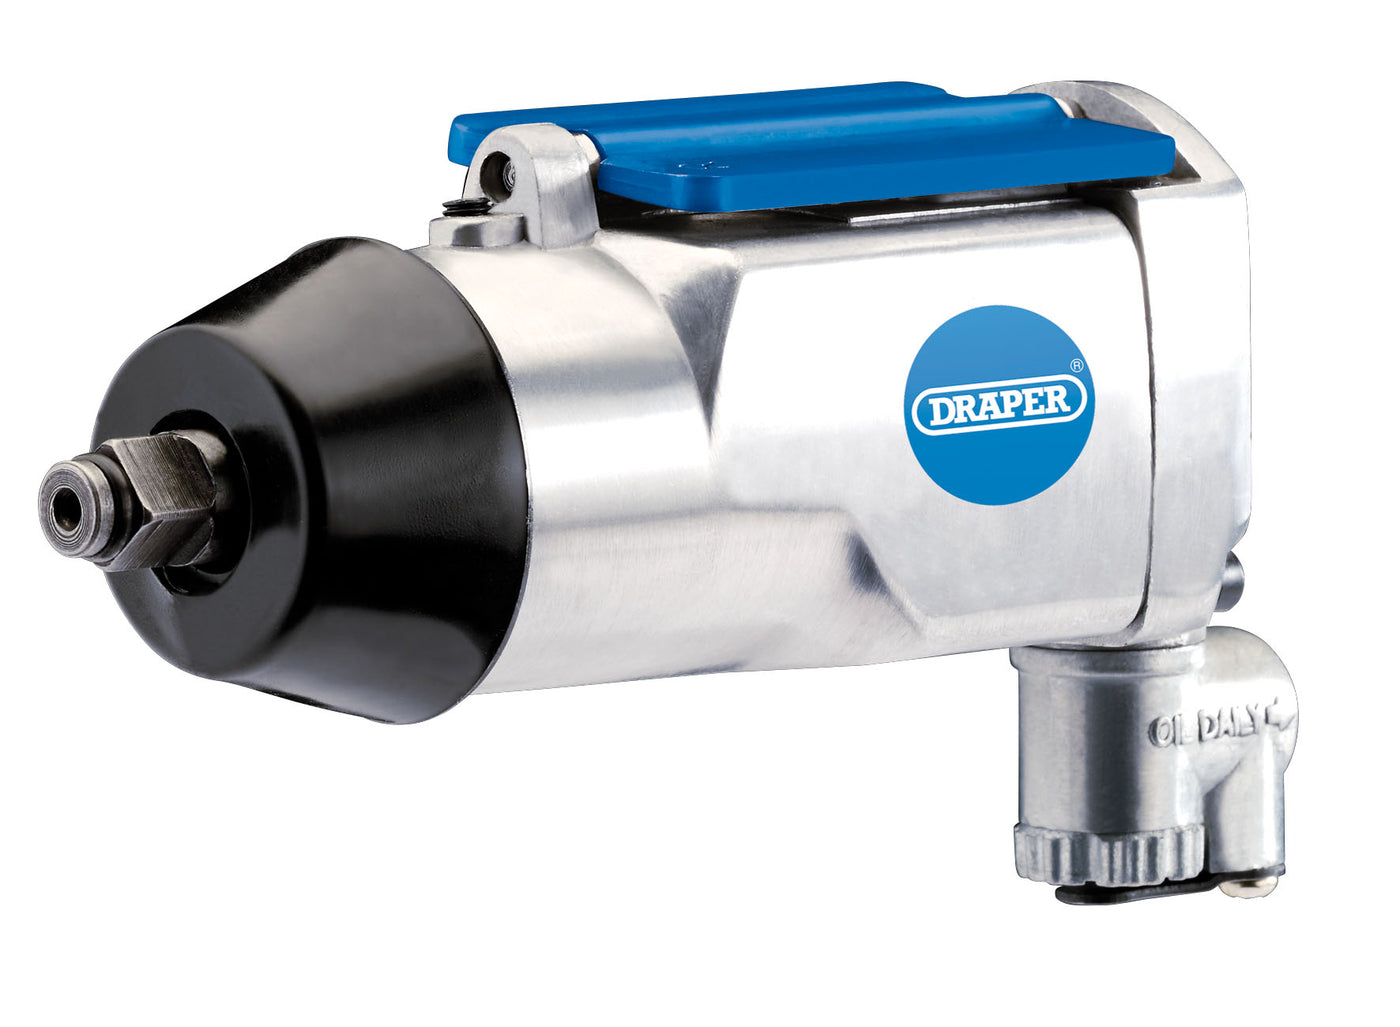 Draper 84120 Butterfly Type Air Impact Wrench (3/8" Sq. Dr.)